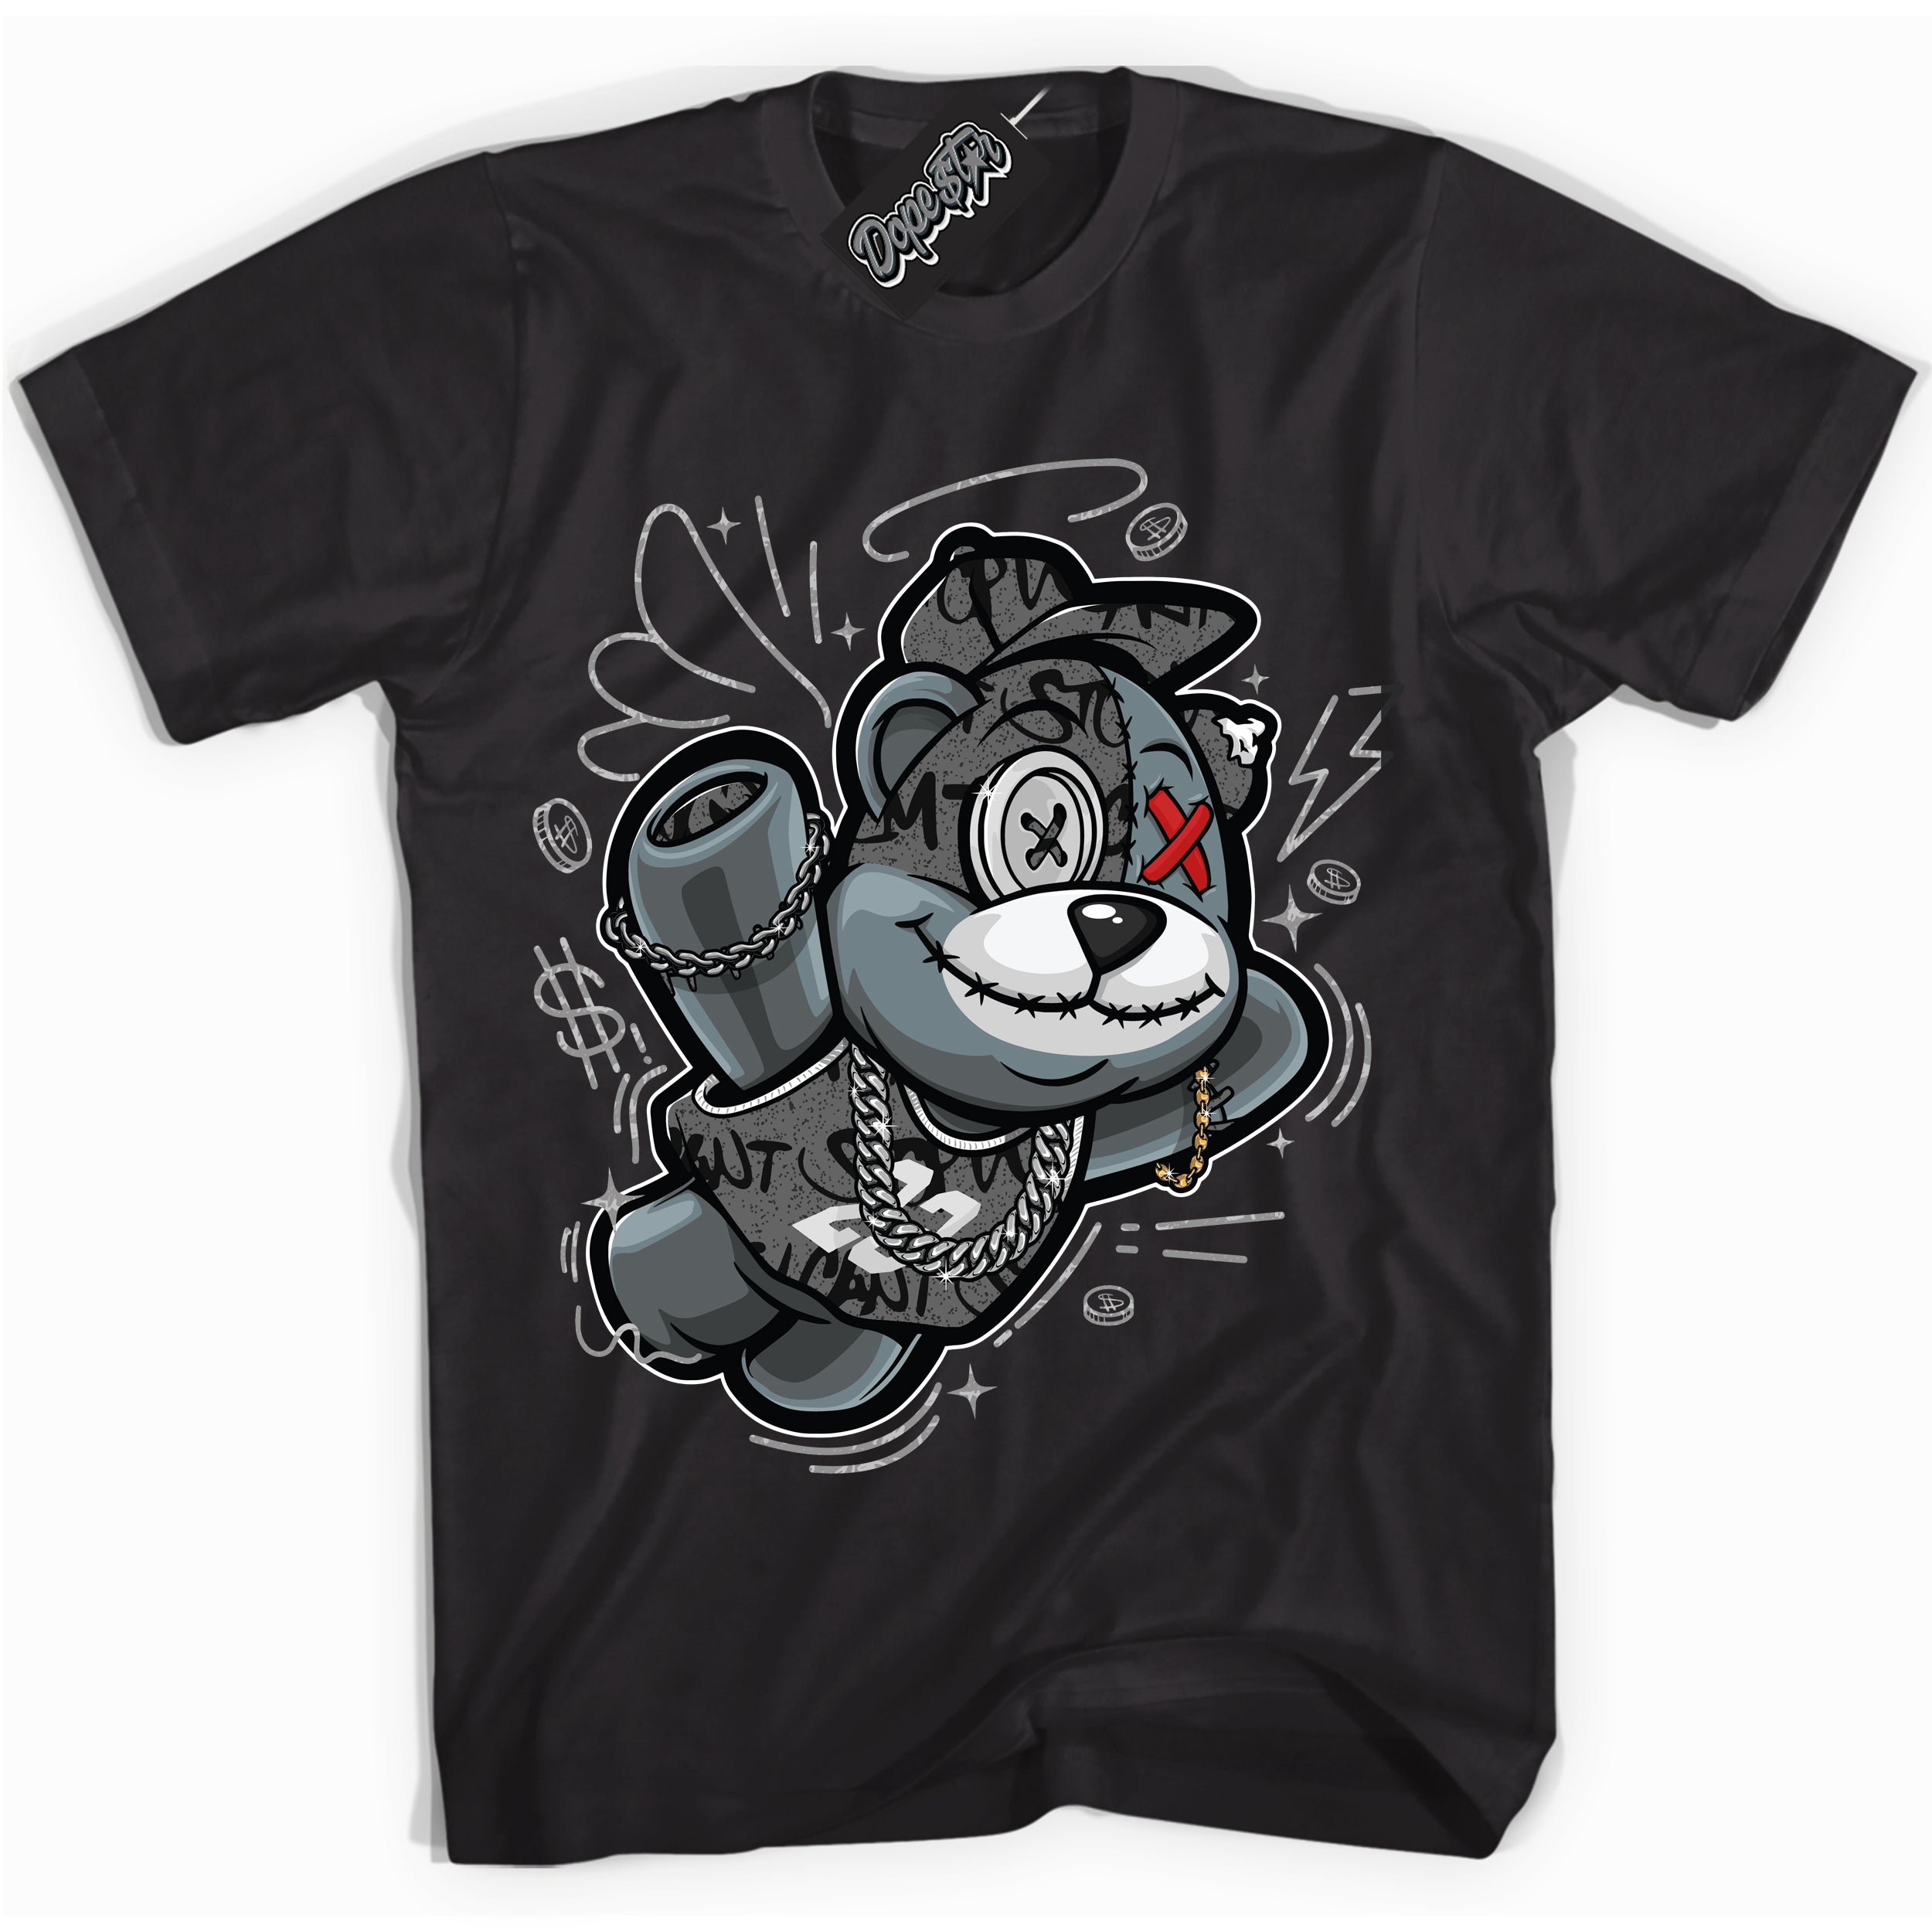 Cool Black Shirt with “ Slam Dunk Bear ” design that perfectly matches Rebellionaire 1s Sneakers.